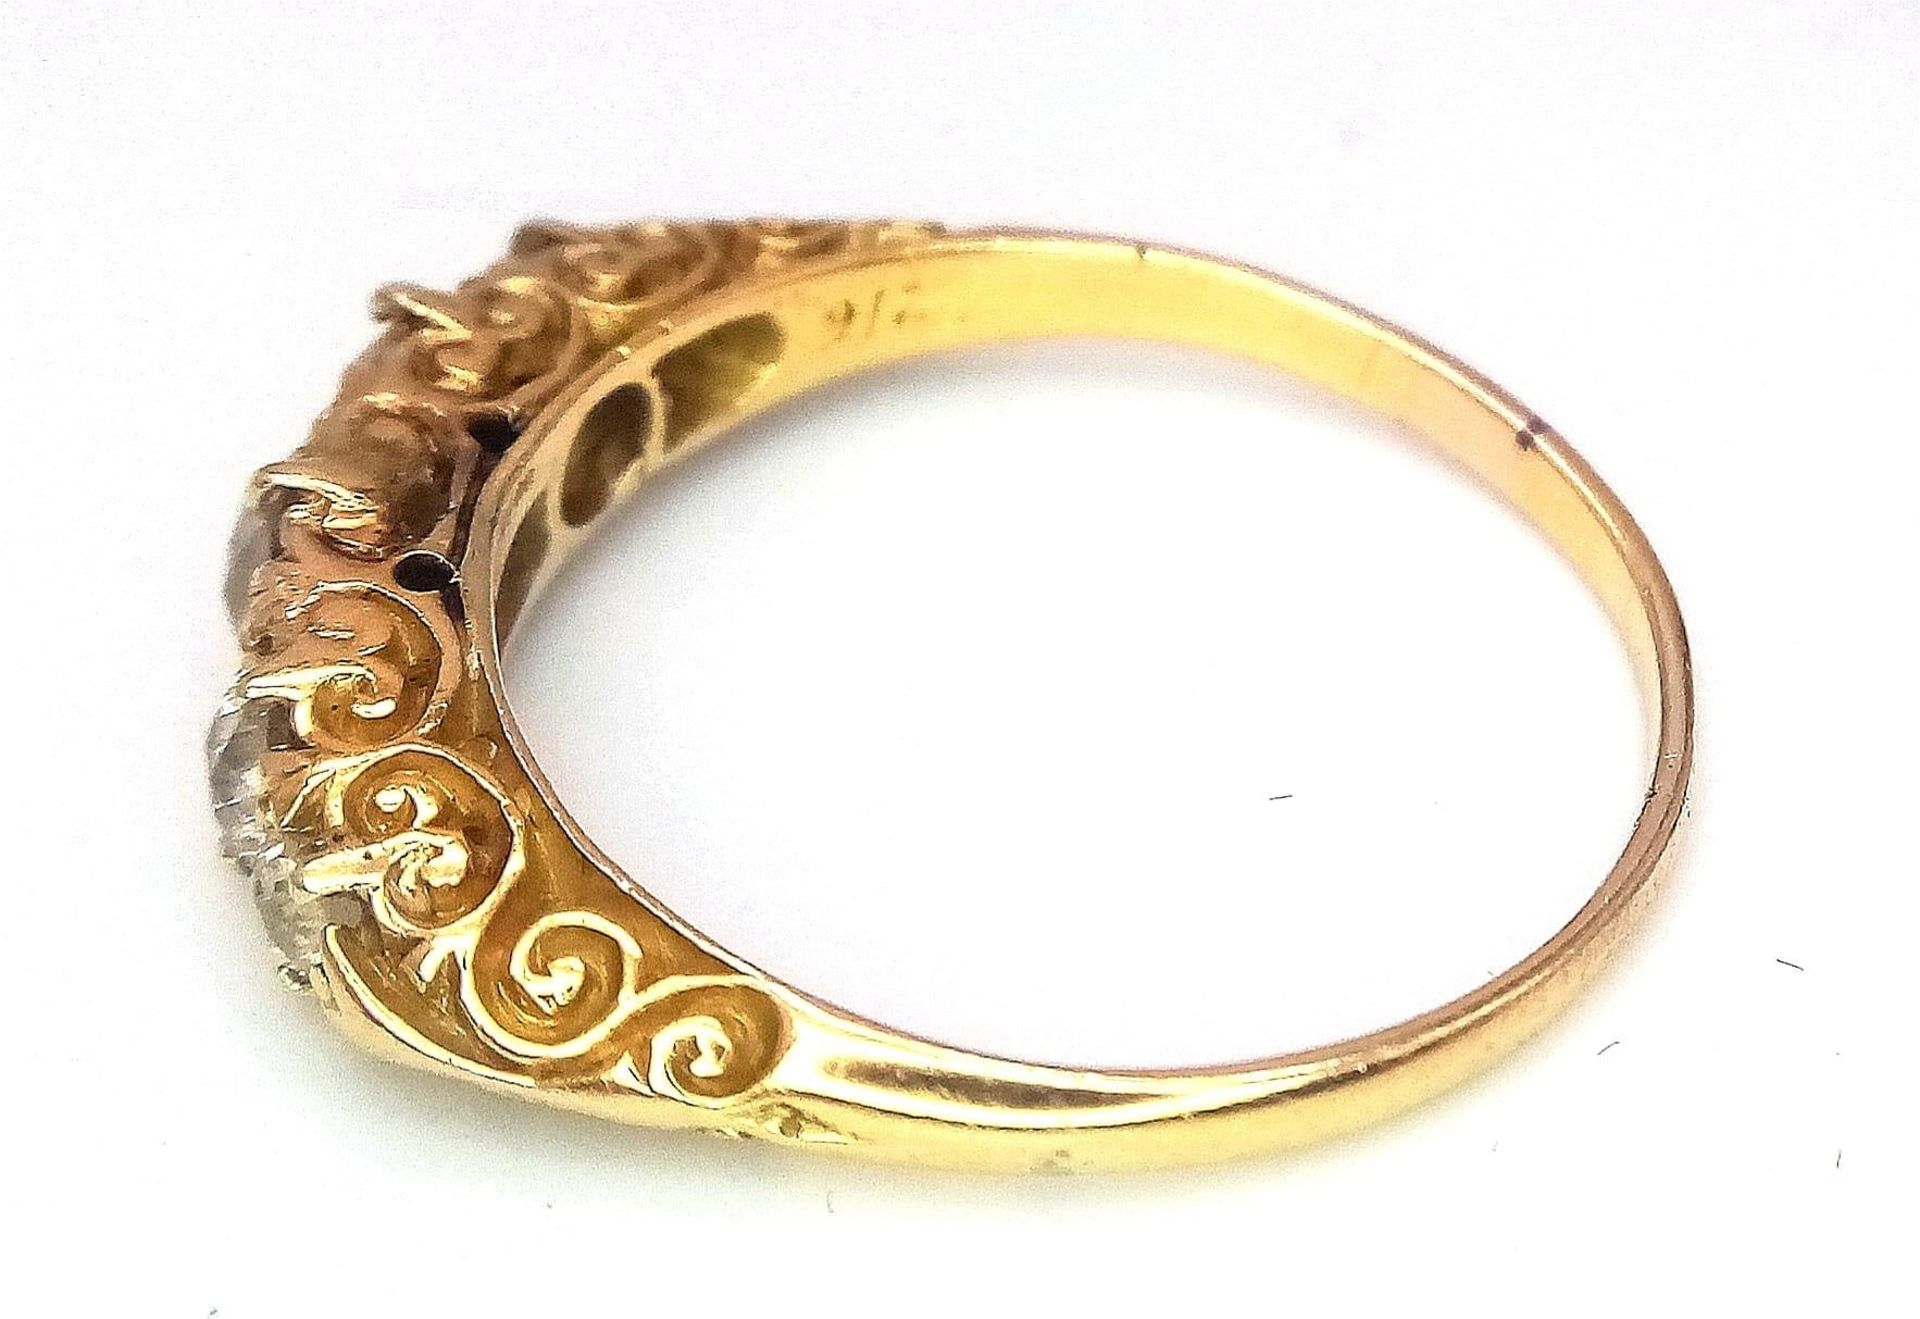 AN ANTIQUE 18K YELOW GOLD DIAMOND 5 STONE SET RING, WITH APPROX 0.60CT OLD CUT DIAMONDS, WEIGHT 2.5G - Image 11 of 13